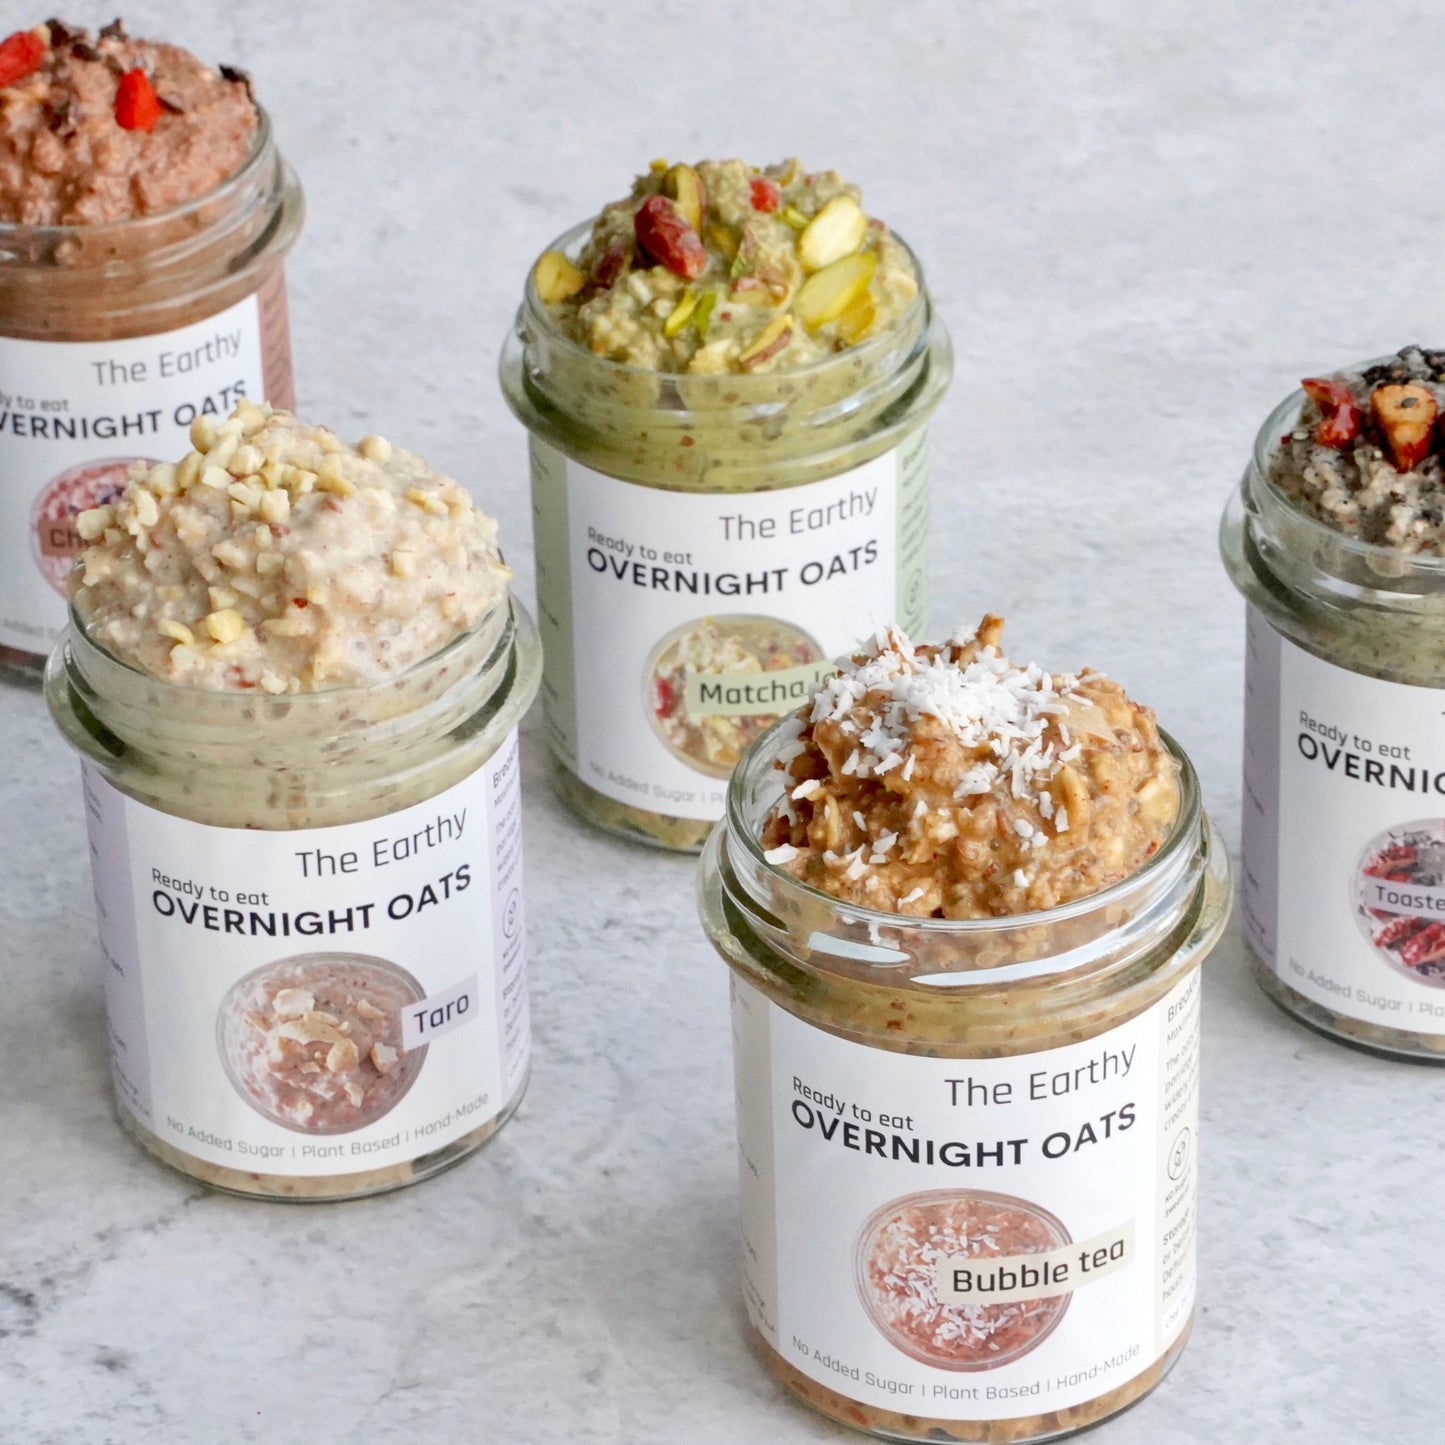 Ready To Eat Overnight Oats Taster Bundle by The Earthy - Vegan Overnight Oats